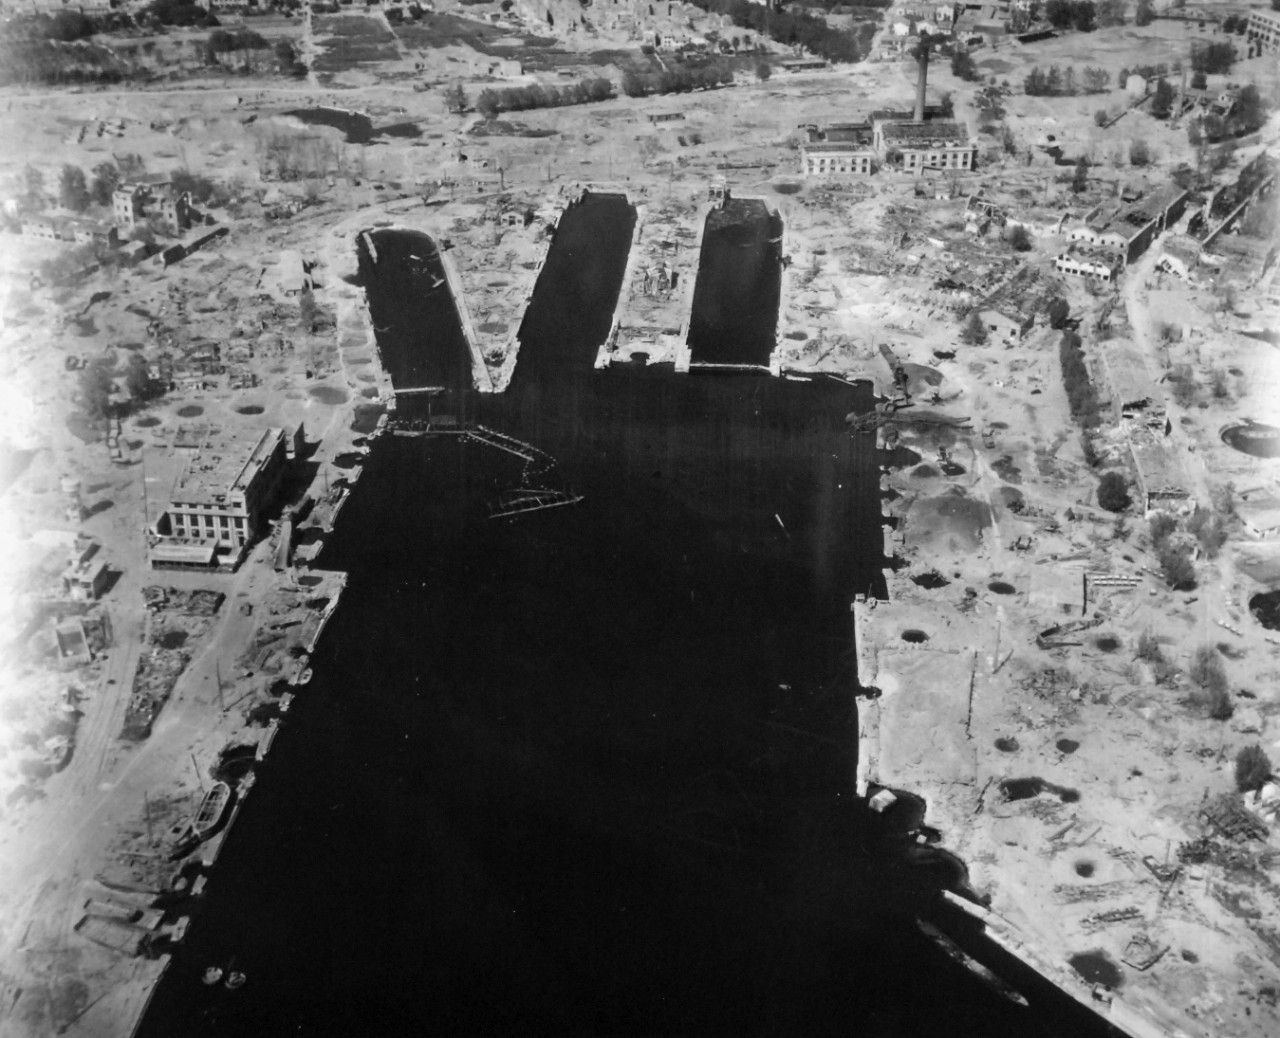 80-G-364006:  Invasion of Southern France, Toulon, August 1944.   Aerial view of the destruction to the harbor and installations at Toulon, France.  Taken by crew of USS Catoctin   (AGC 5).  Photograph received on 2 April 1946.   Official U.S. Navy Photograph, now in the collections of the National Archives.  (2014/7/10).